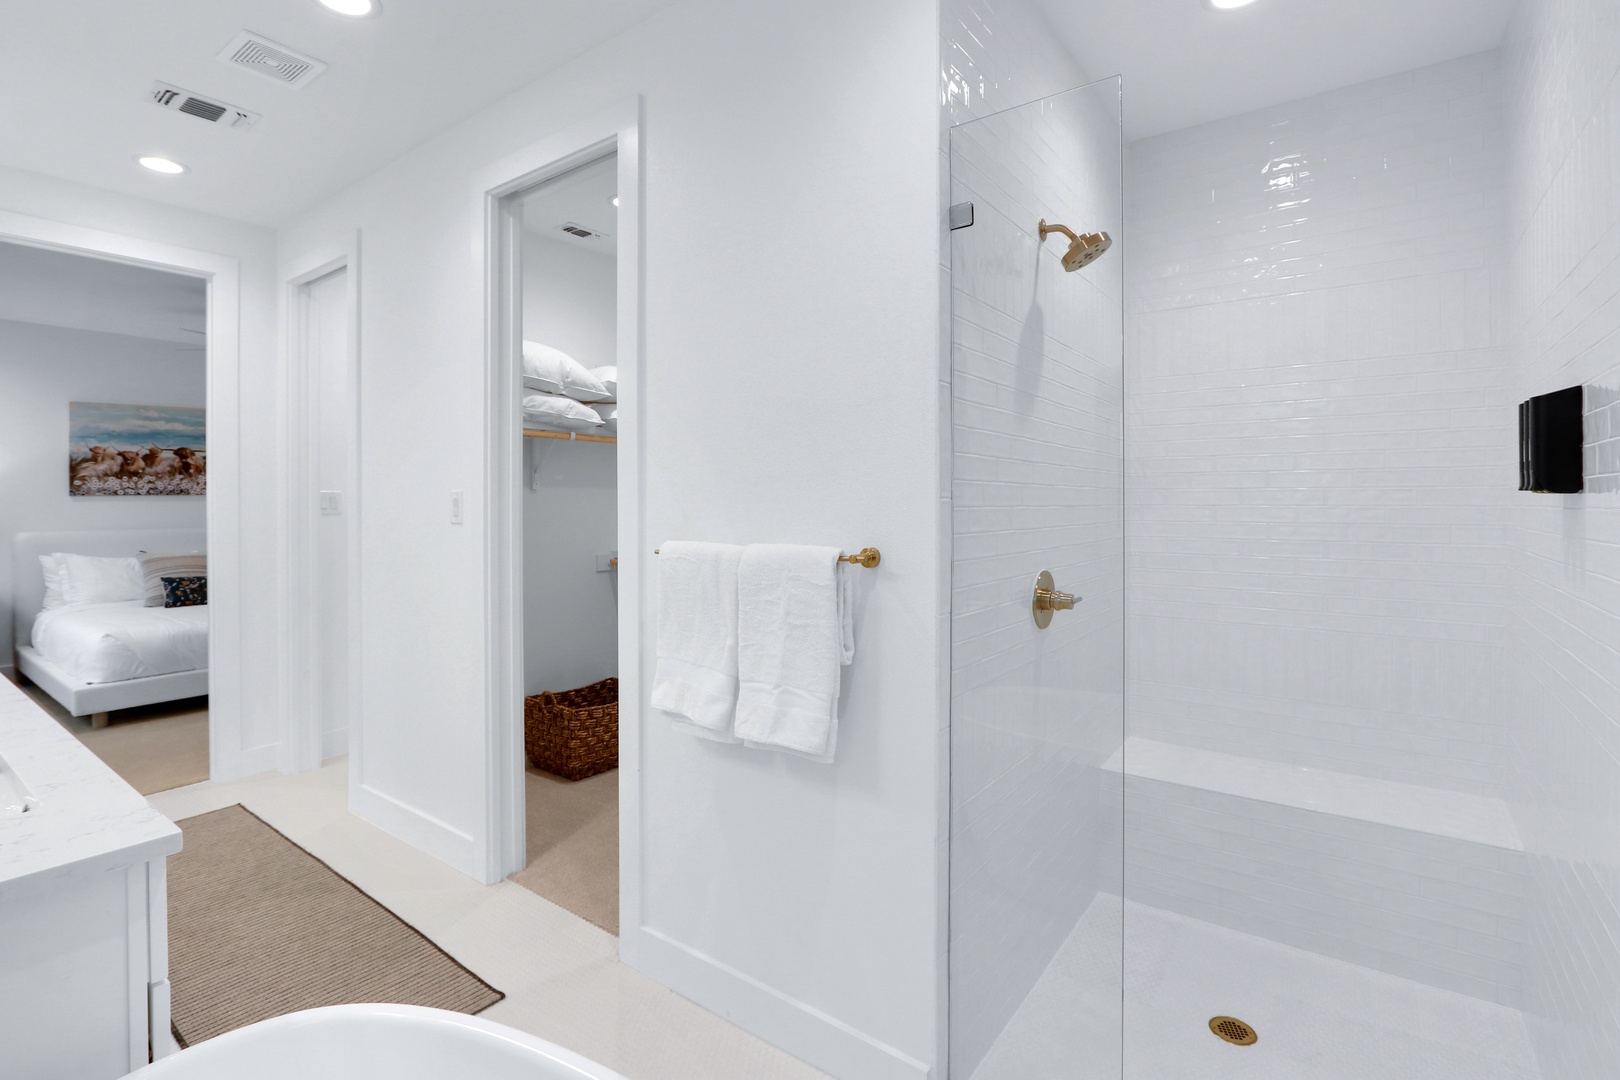 This chic ensuite features dual vanities, glass shower, & luxurious soaking tub